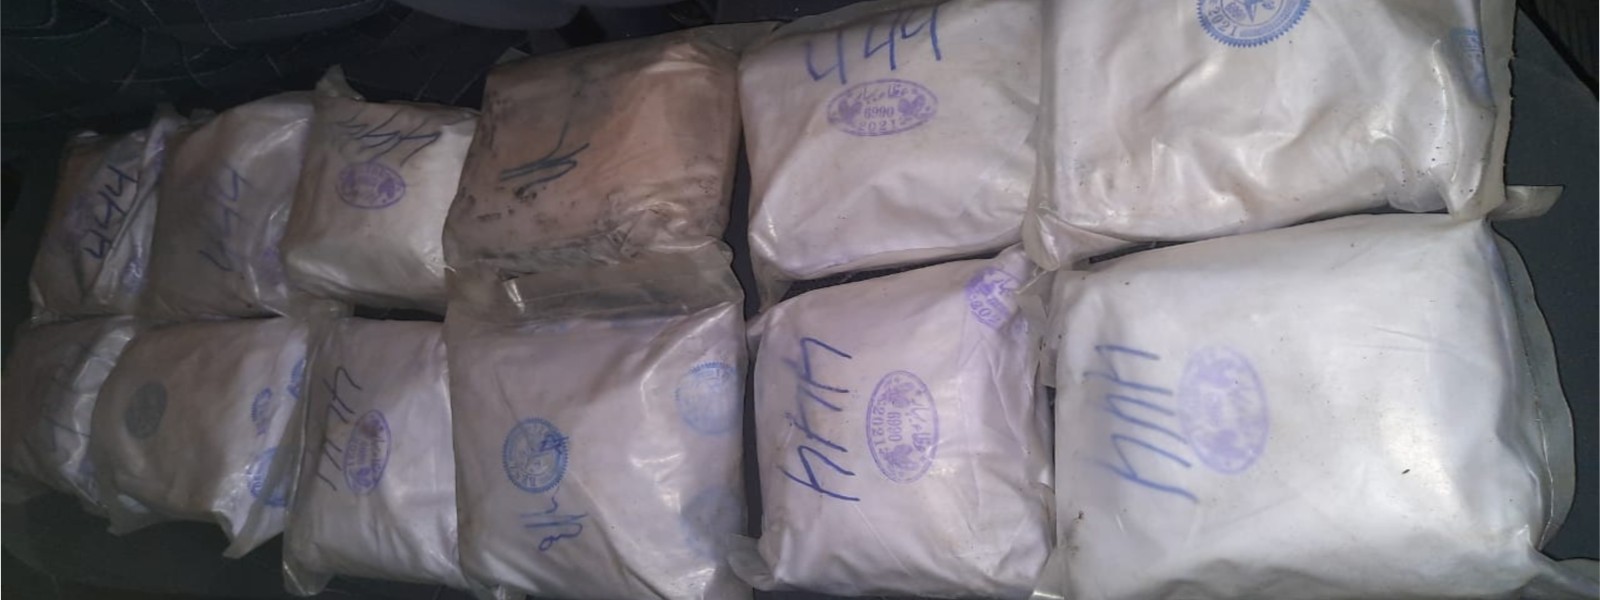 STF arrests 02 suspects for possession of heroin worth over Rs. 130 million